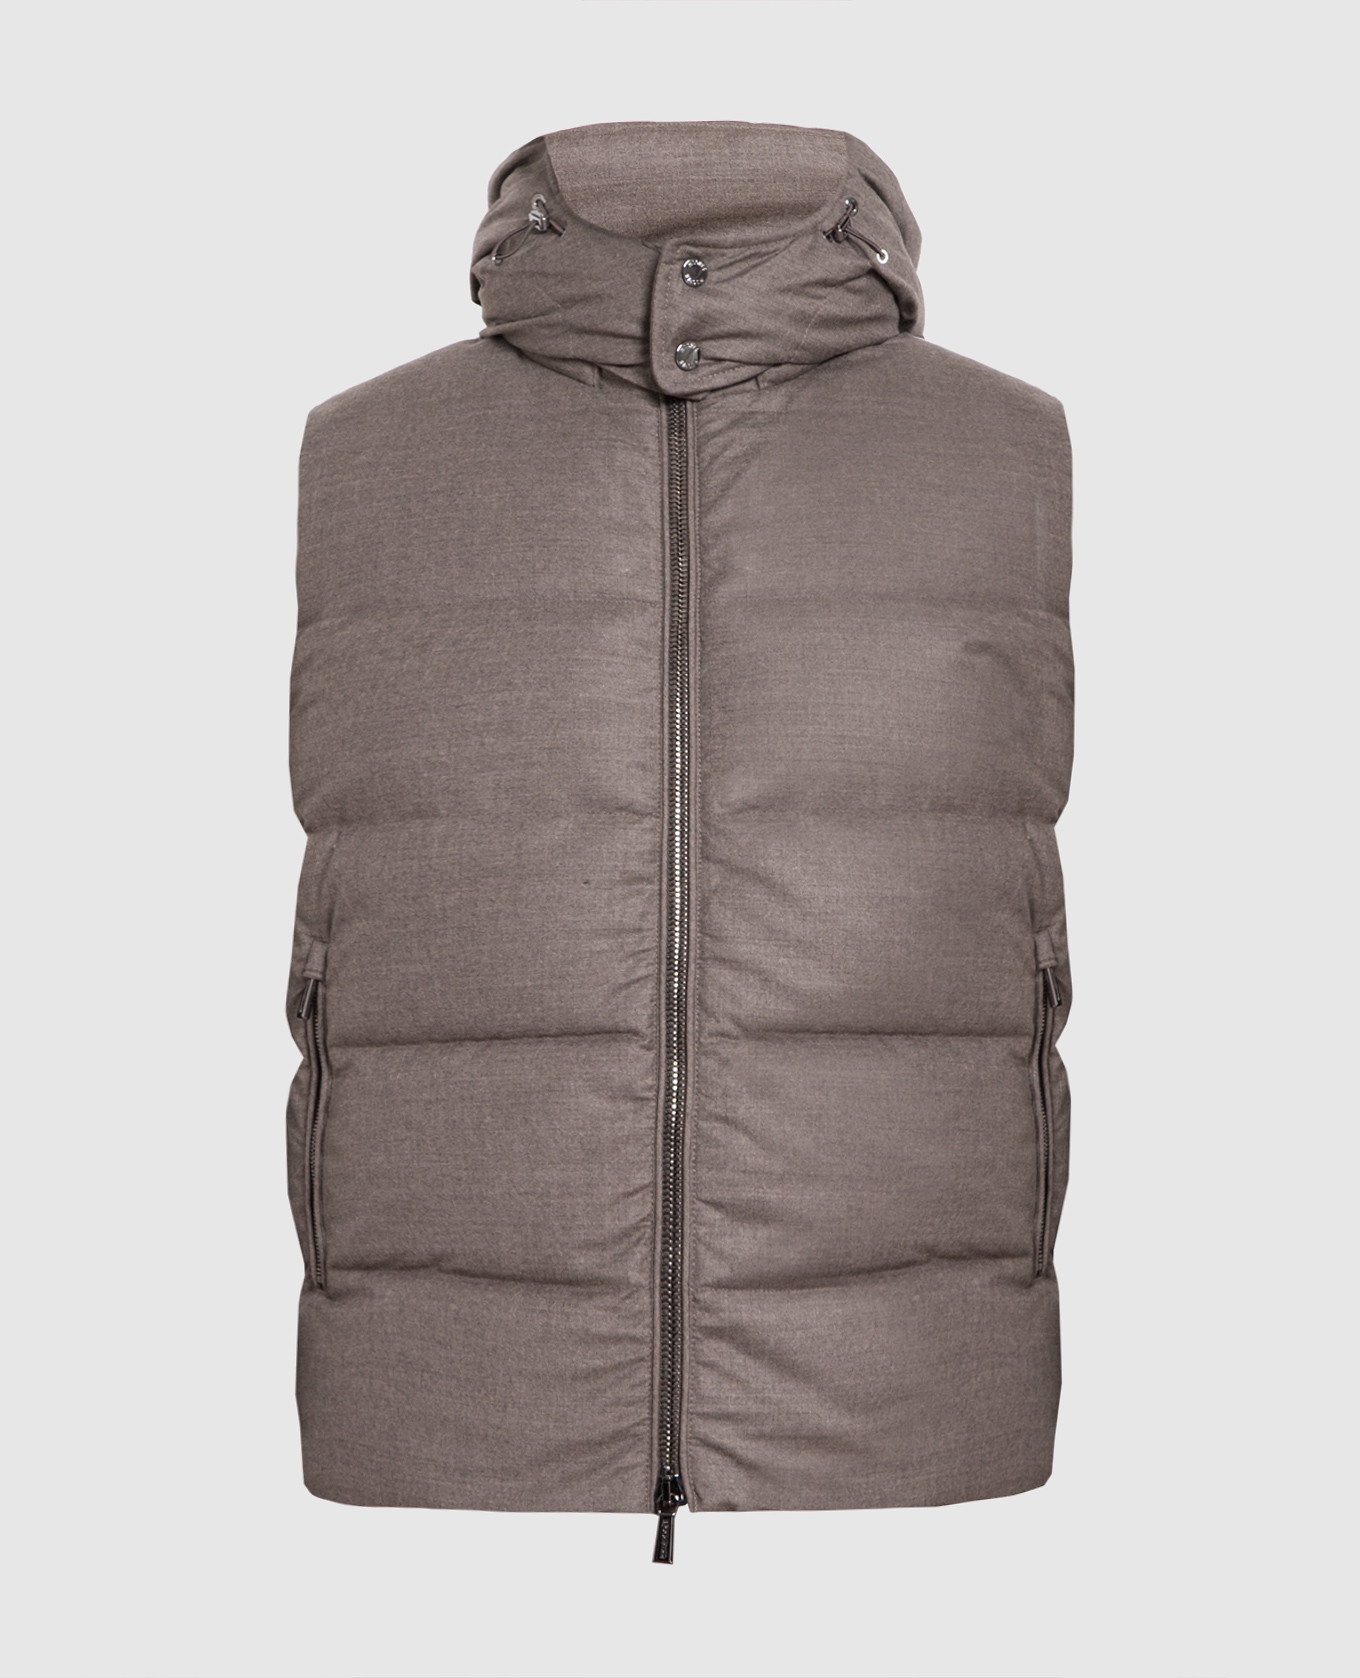 Beige down vest made of wool and cashmere